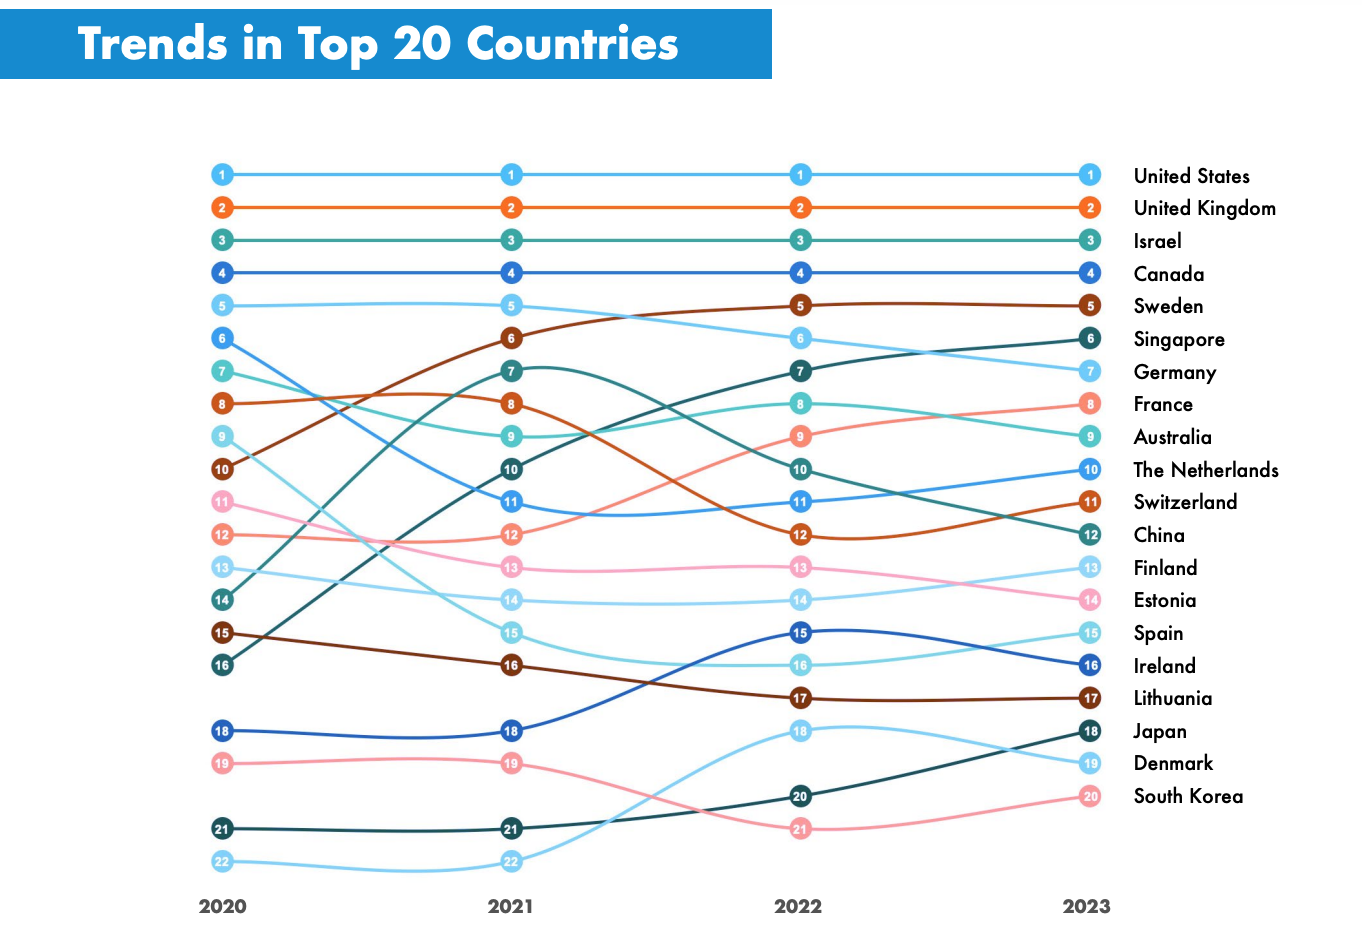 Trends in top 20 countries, Source: Global Startup Ecosystem Index 2023, StartupBlink